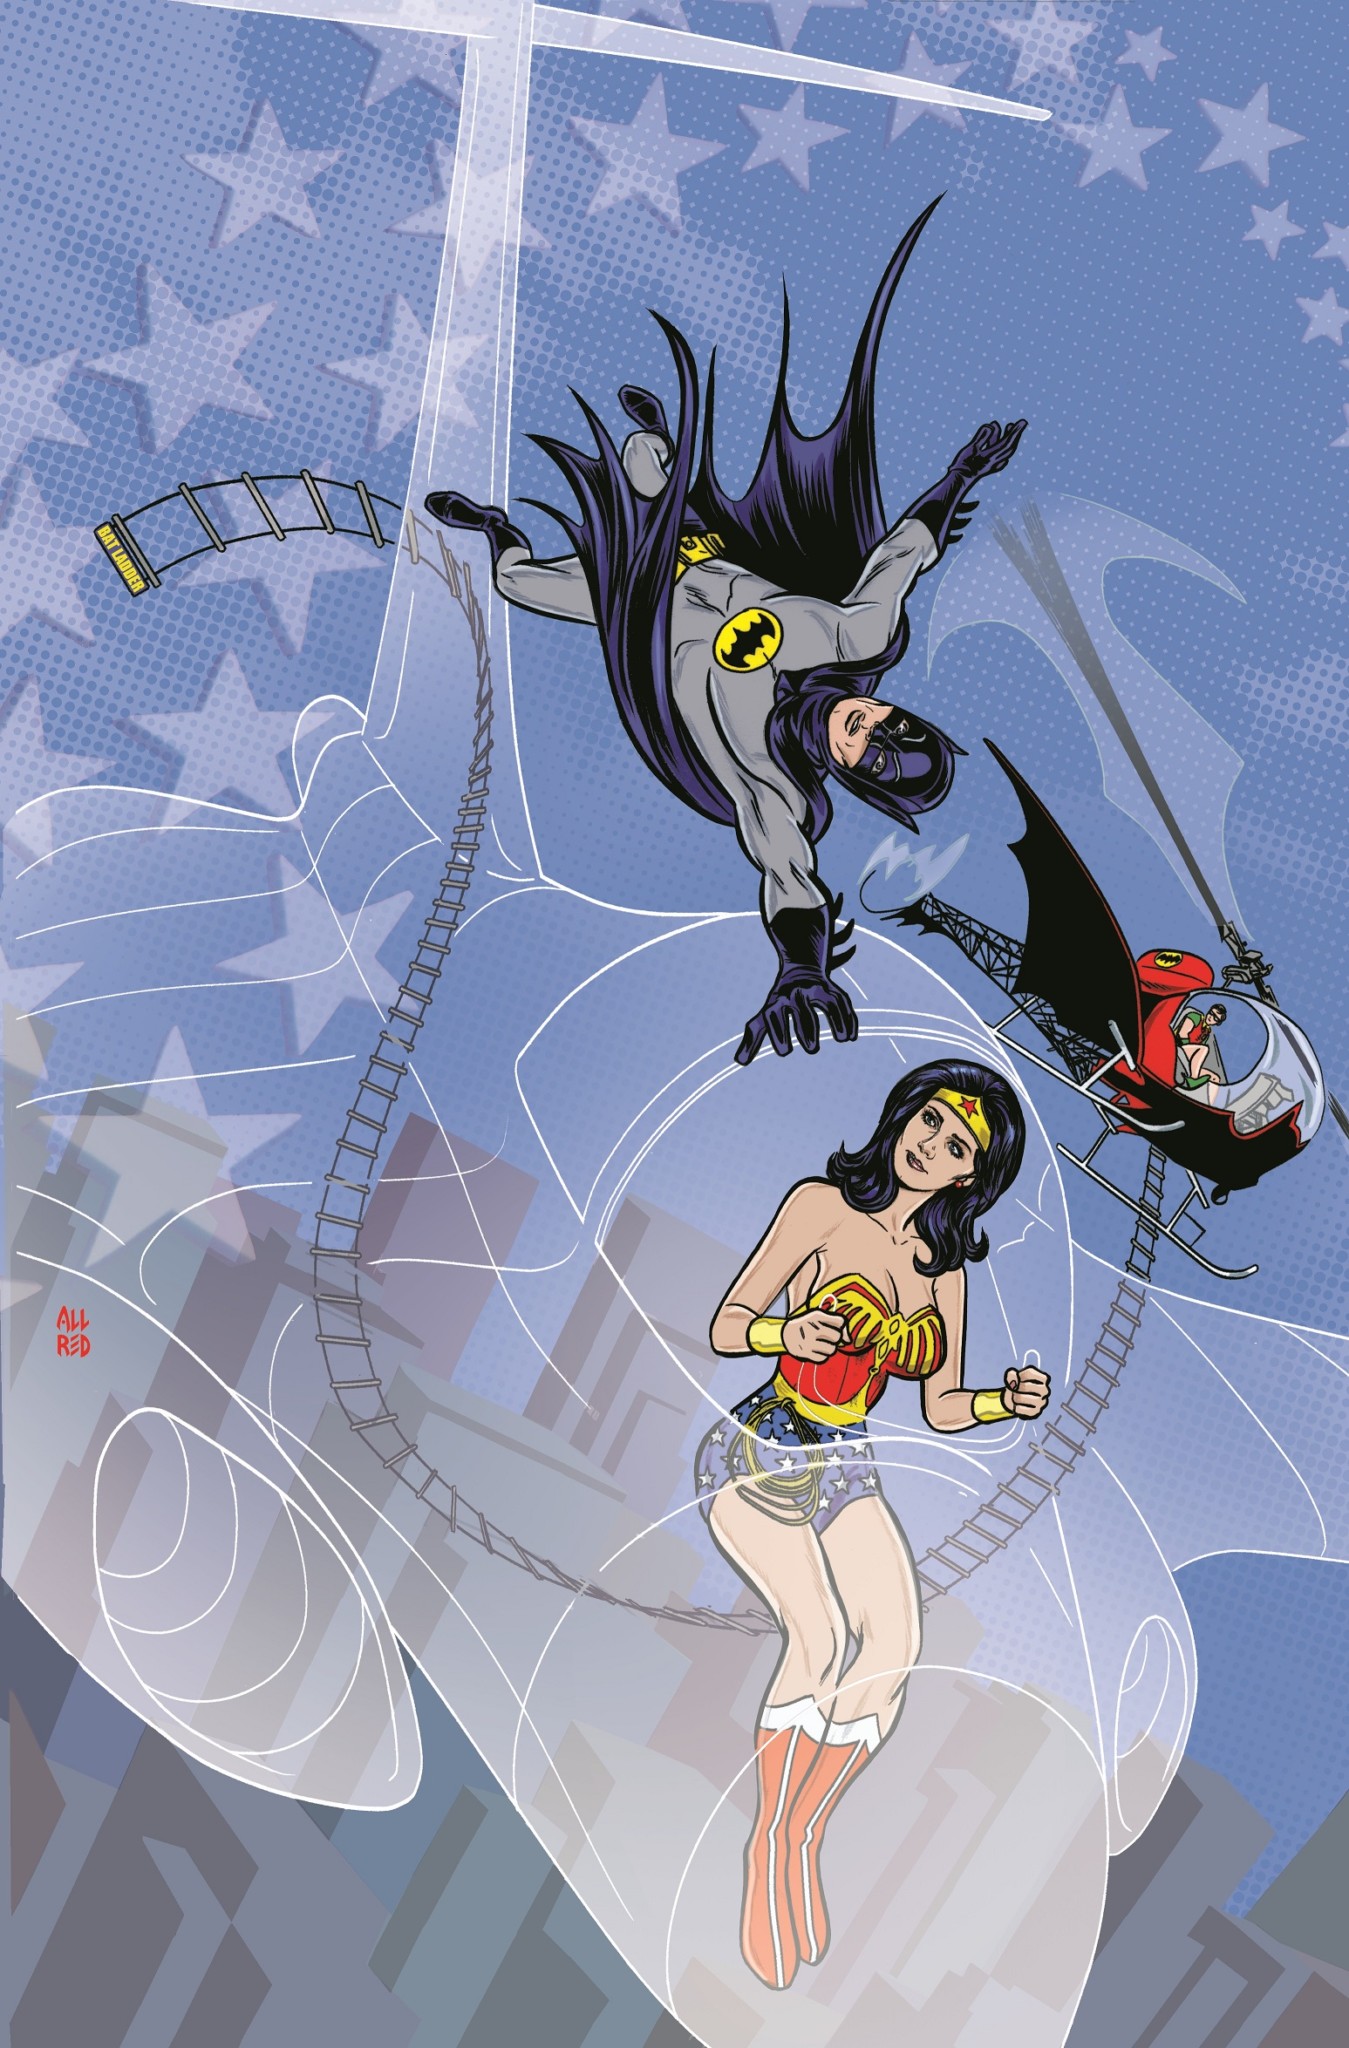 Batman '66 Meets Wonder Woman '77 issue No. 1 cover by Michael Allred